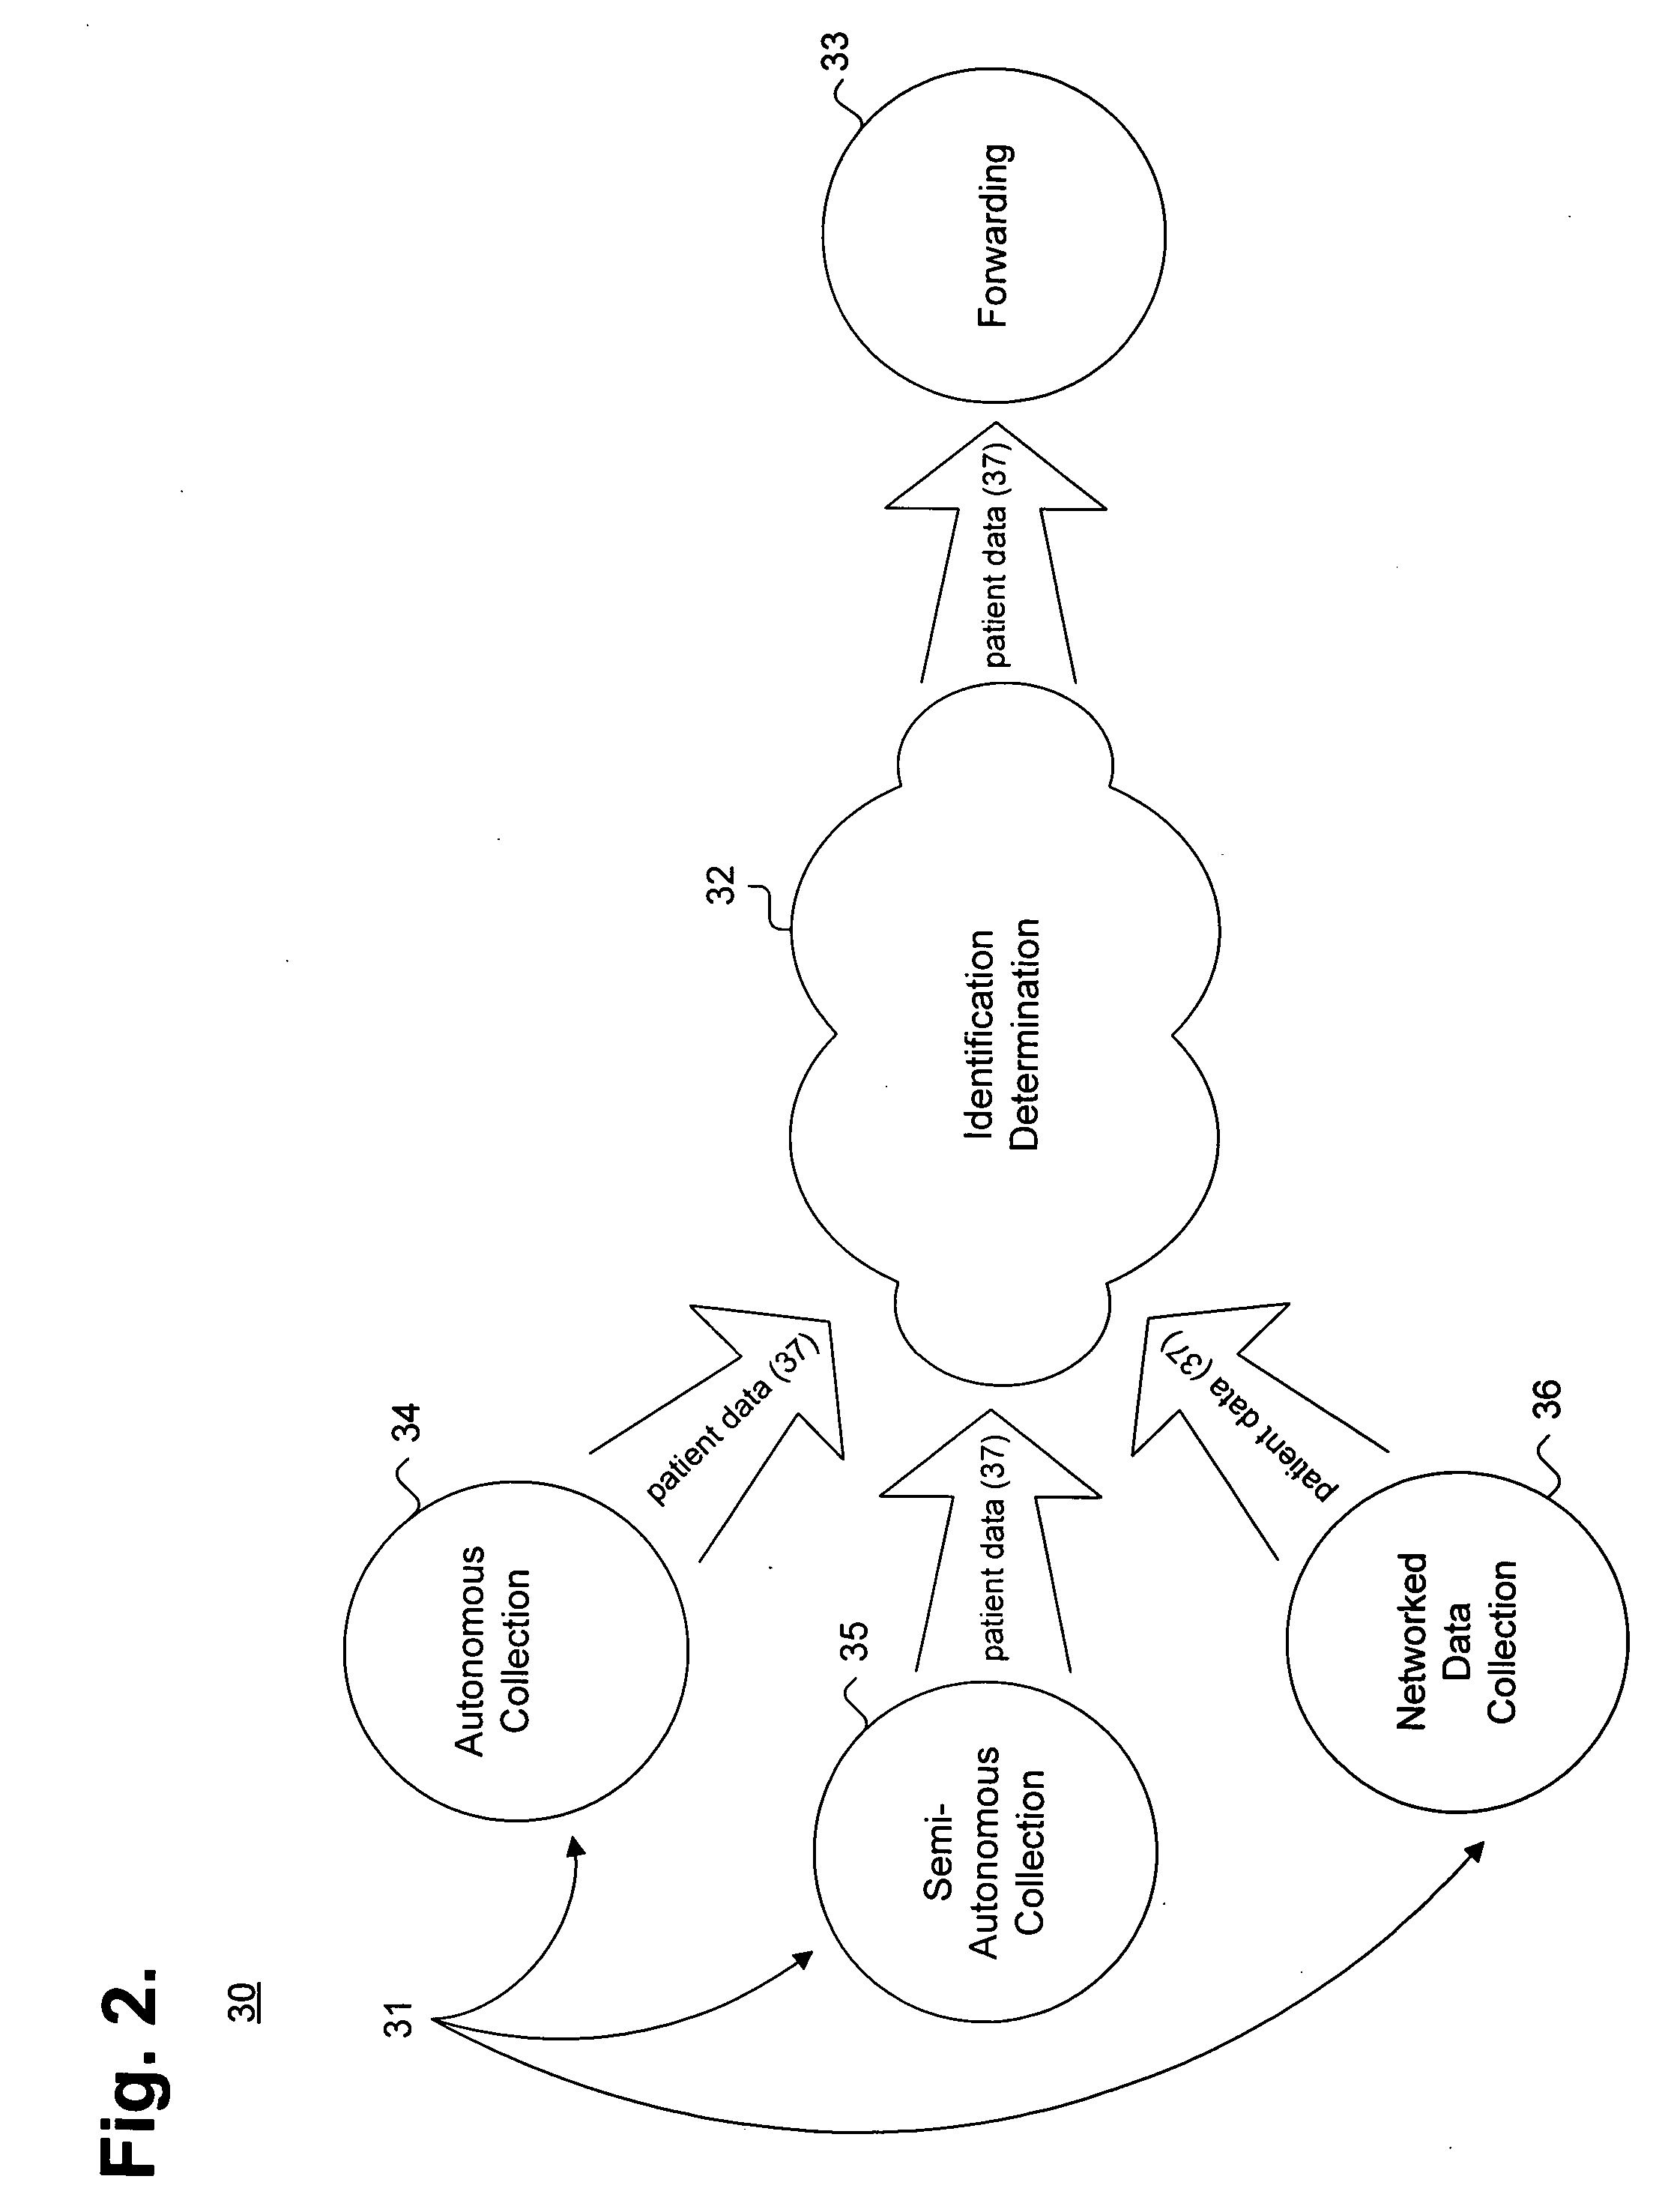 System and method for providing authentication of remotely collected external sensor measures